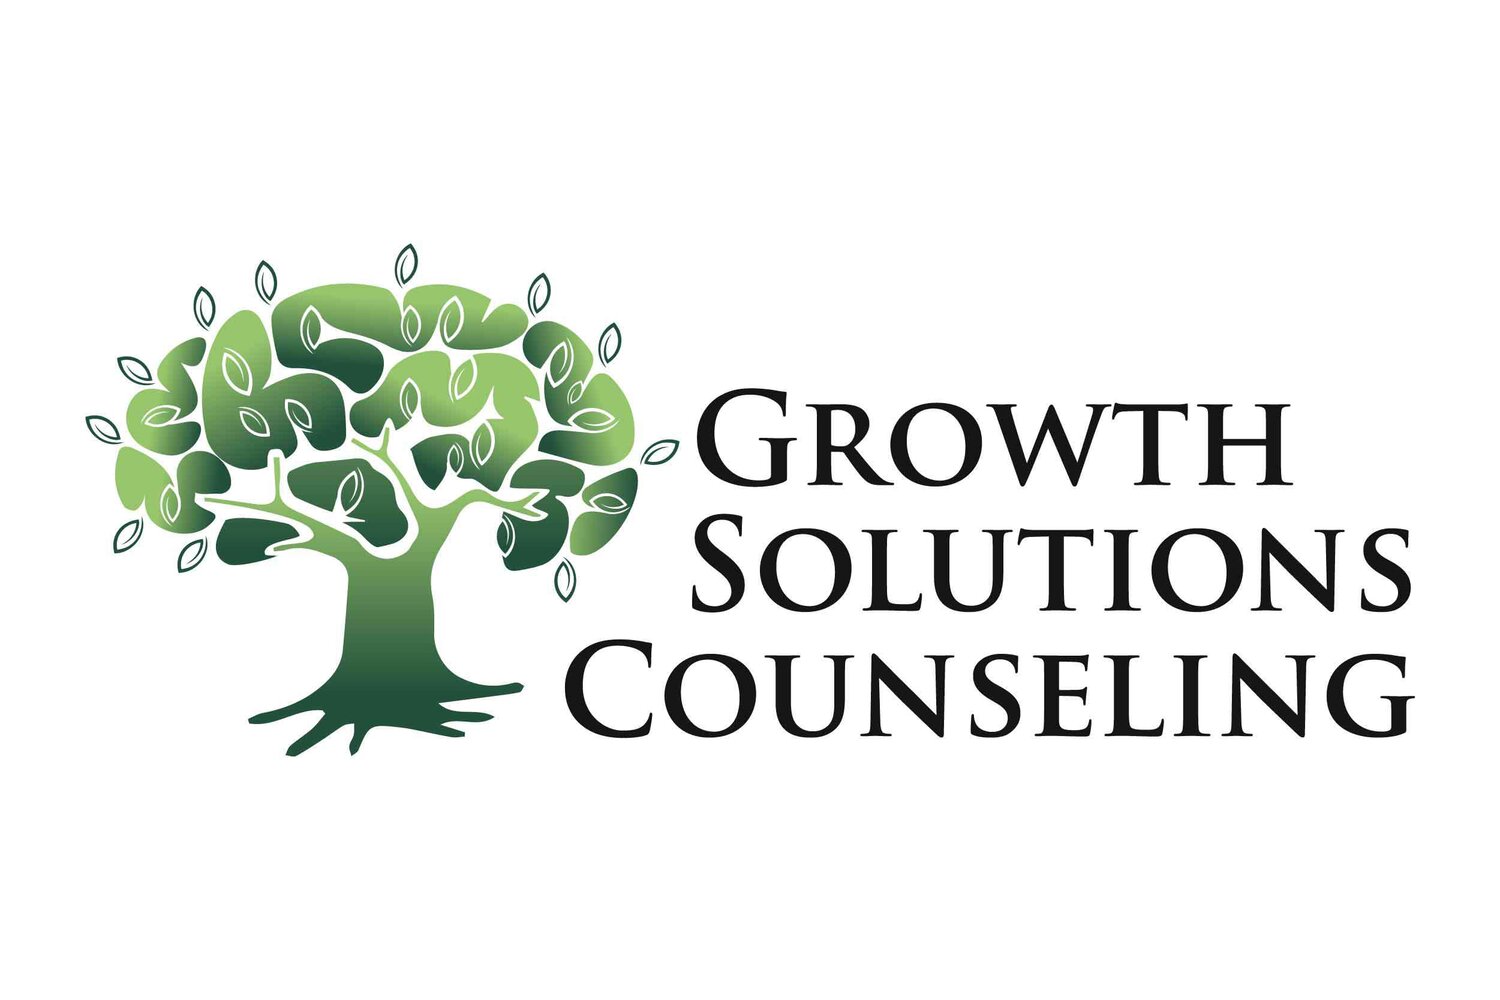 Growth Solutions Counseling